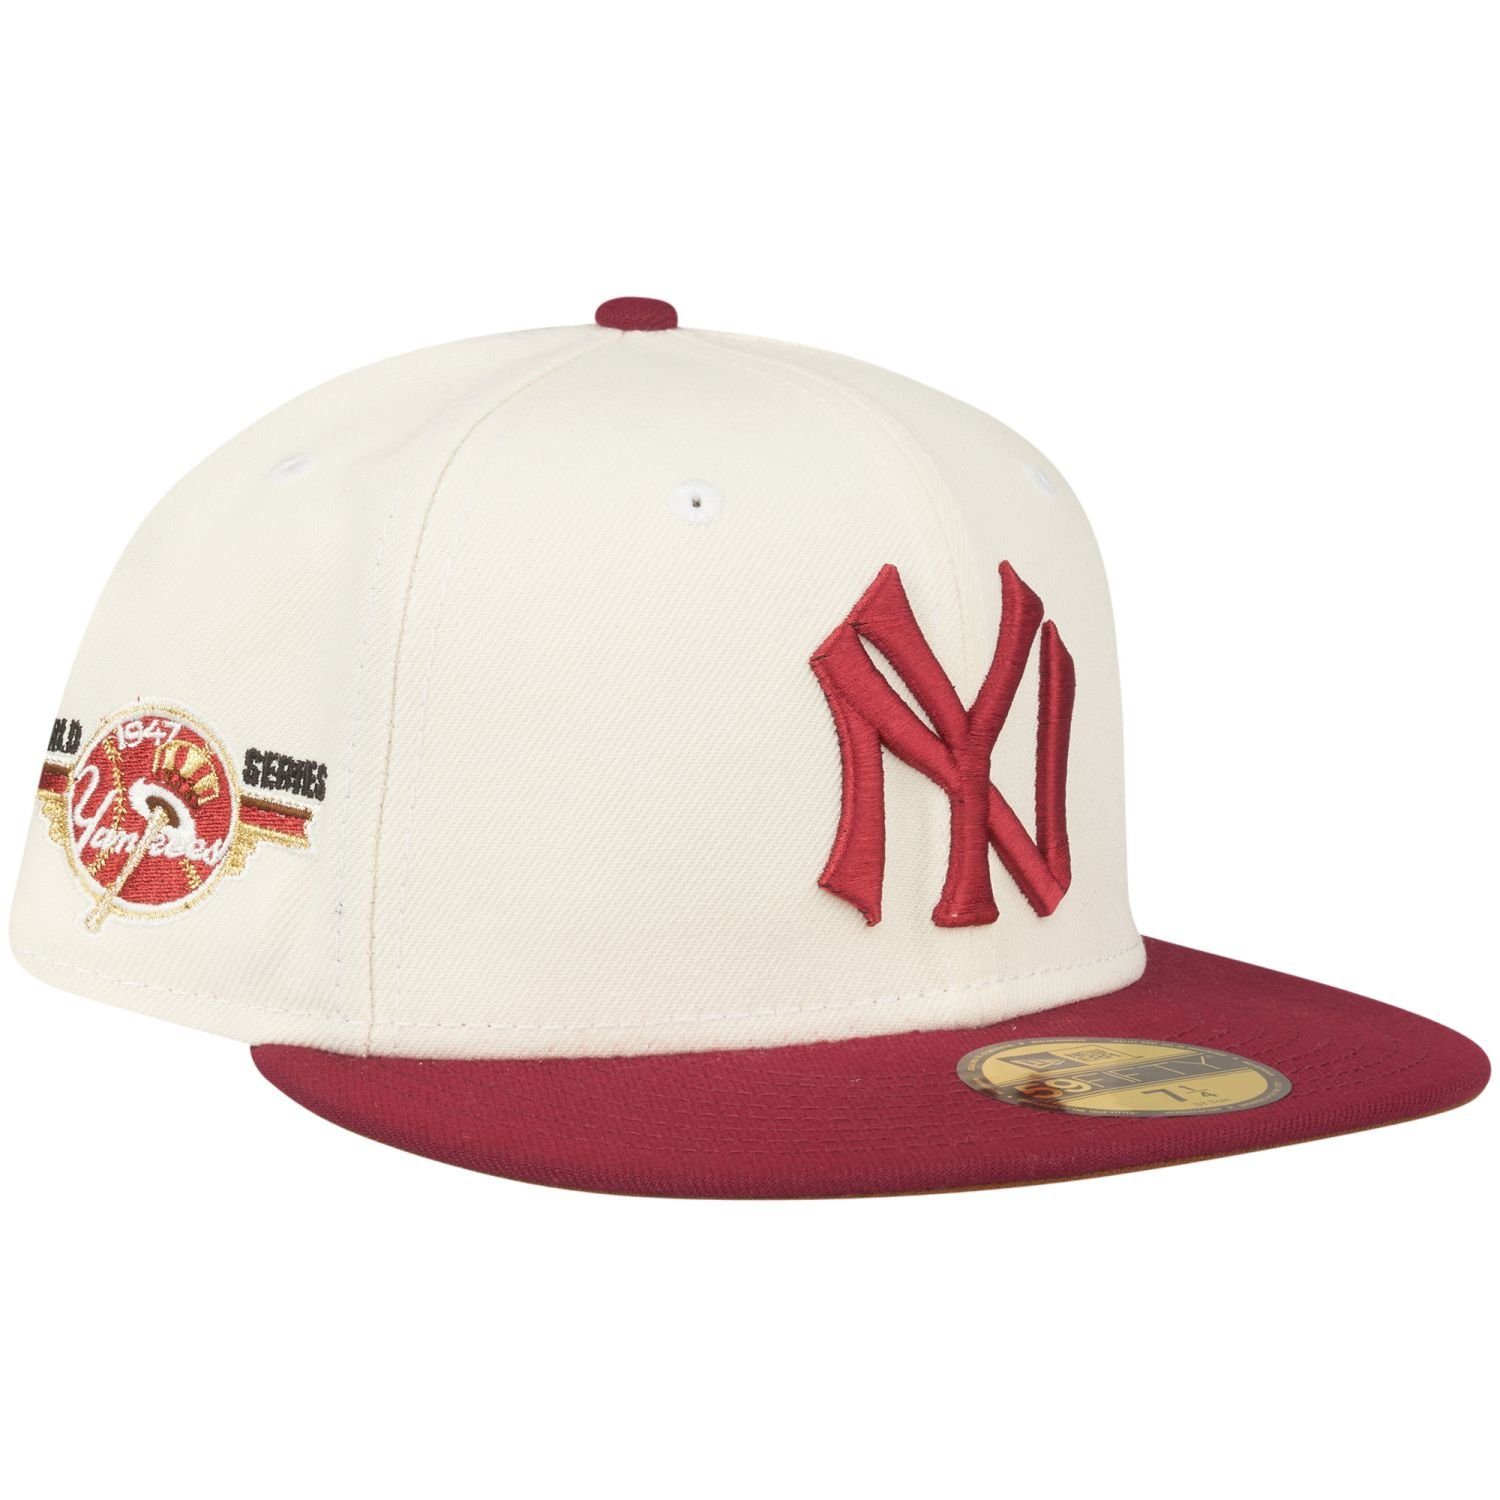 New Era Fitted Cap 59Fifty COOPERSTOWN 1947 New York Yankees